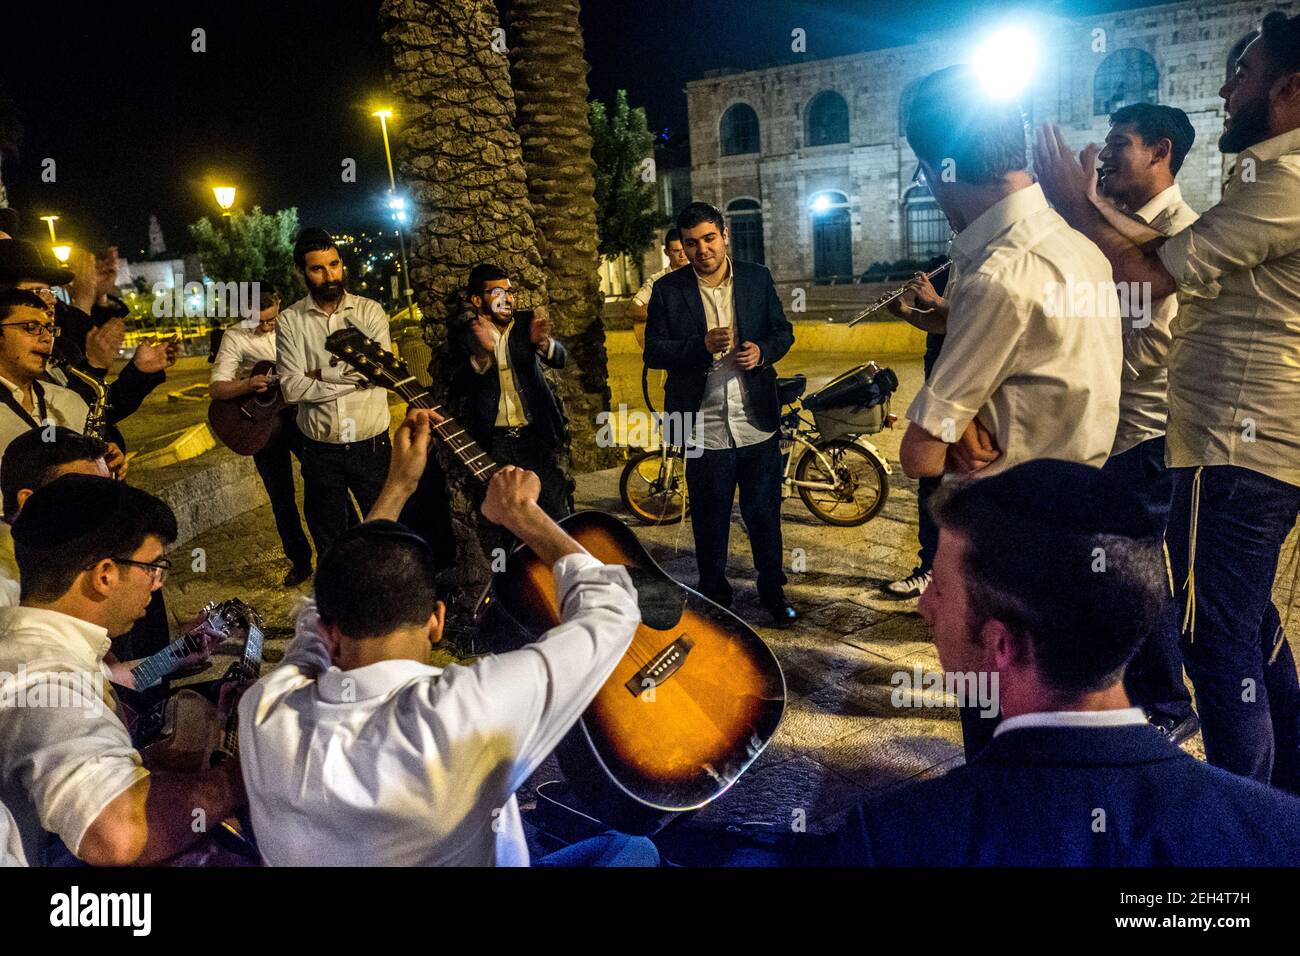 A group of young, practicing Jews play music. They meet every Friday evening at the Jaffah Gate at the foot of the old city walls for Shabbat. May 17, 2018. Jerusalem. Israel. Edit Stock Photo